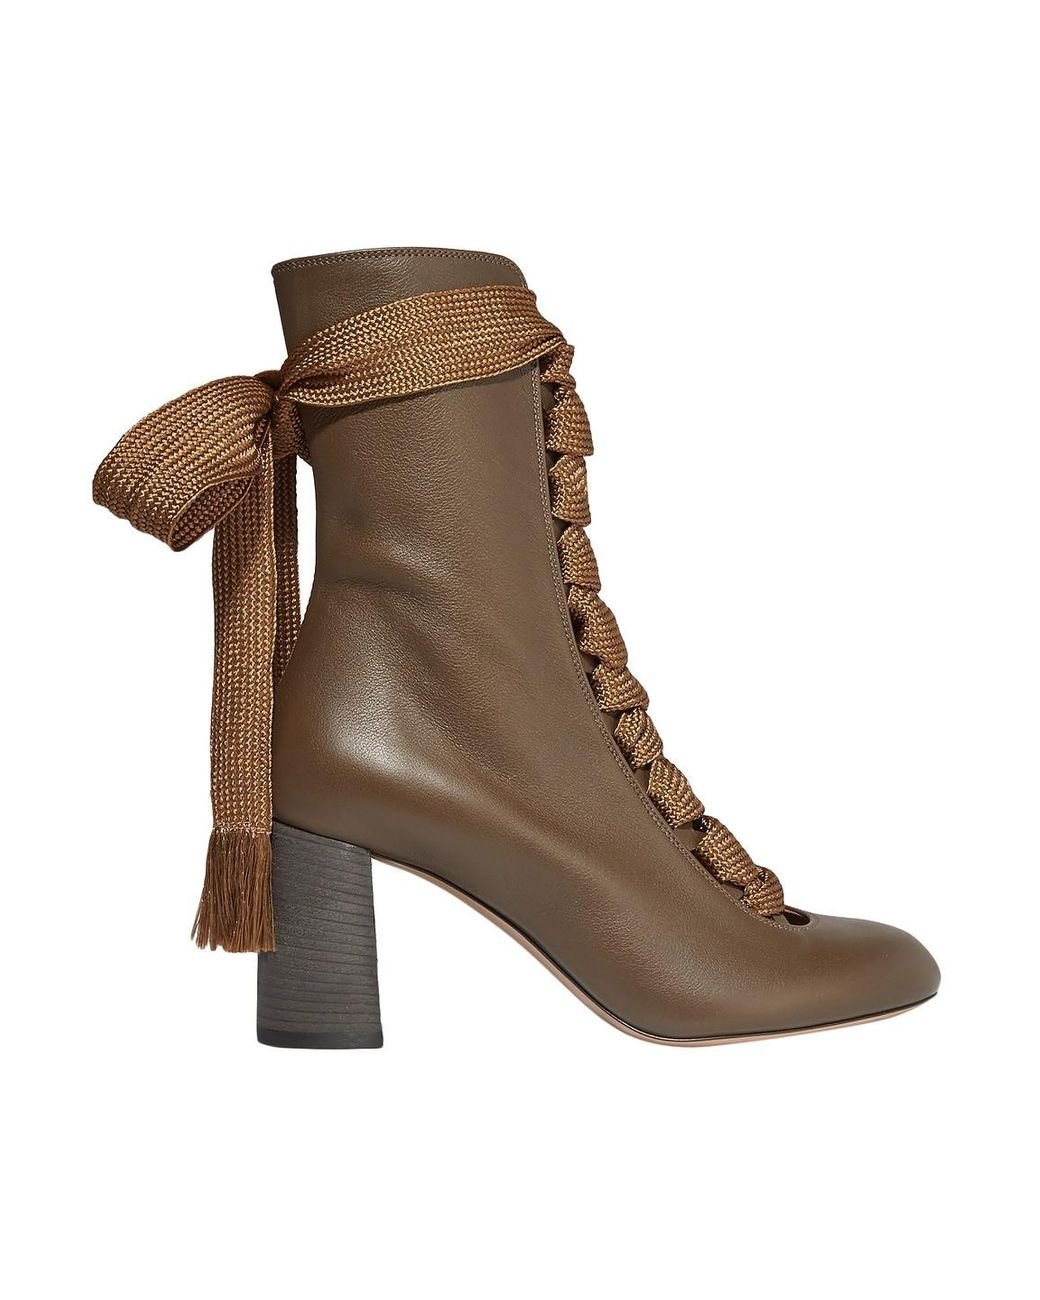 Chloé Chloé Harper Lace-up Leather Ankle Boots Light Brown | Lyst